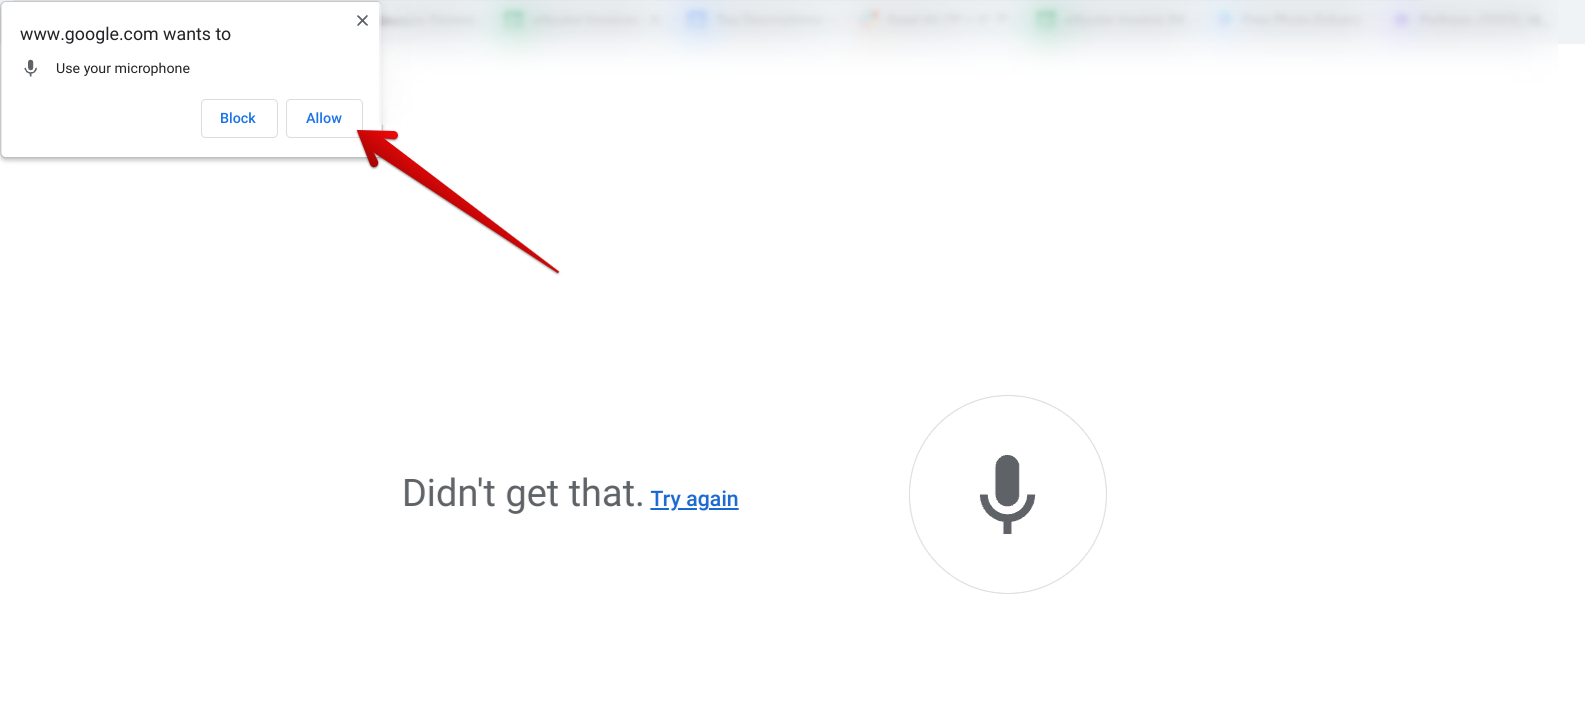 Allowing Google to use microphone